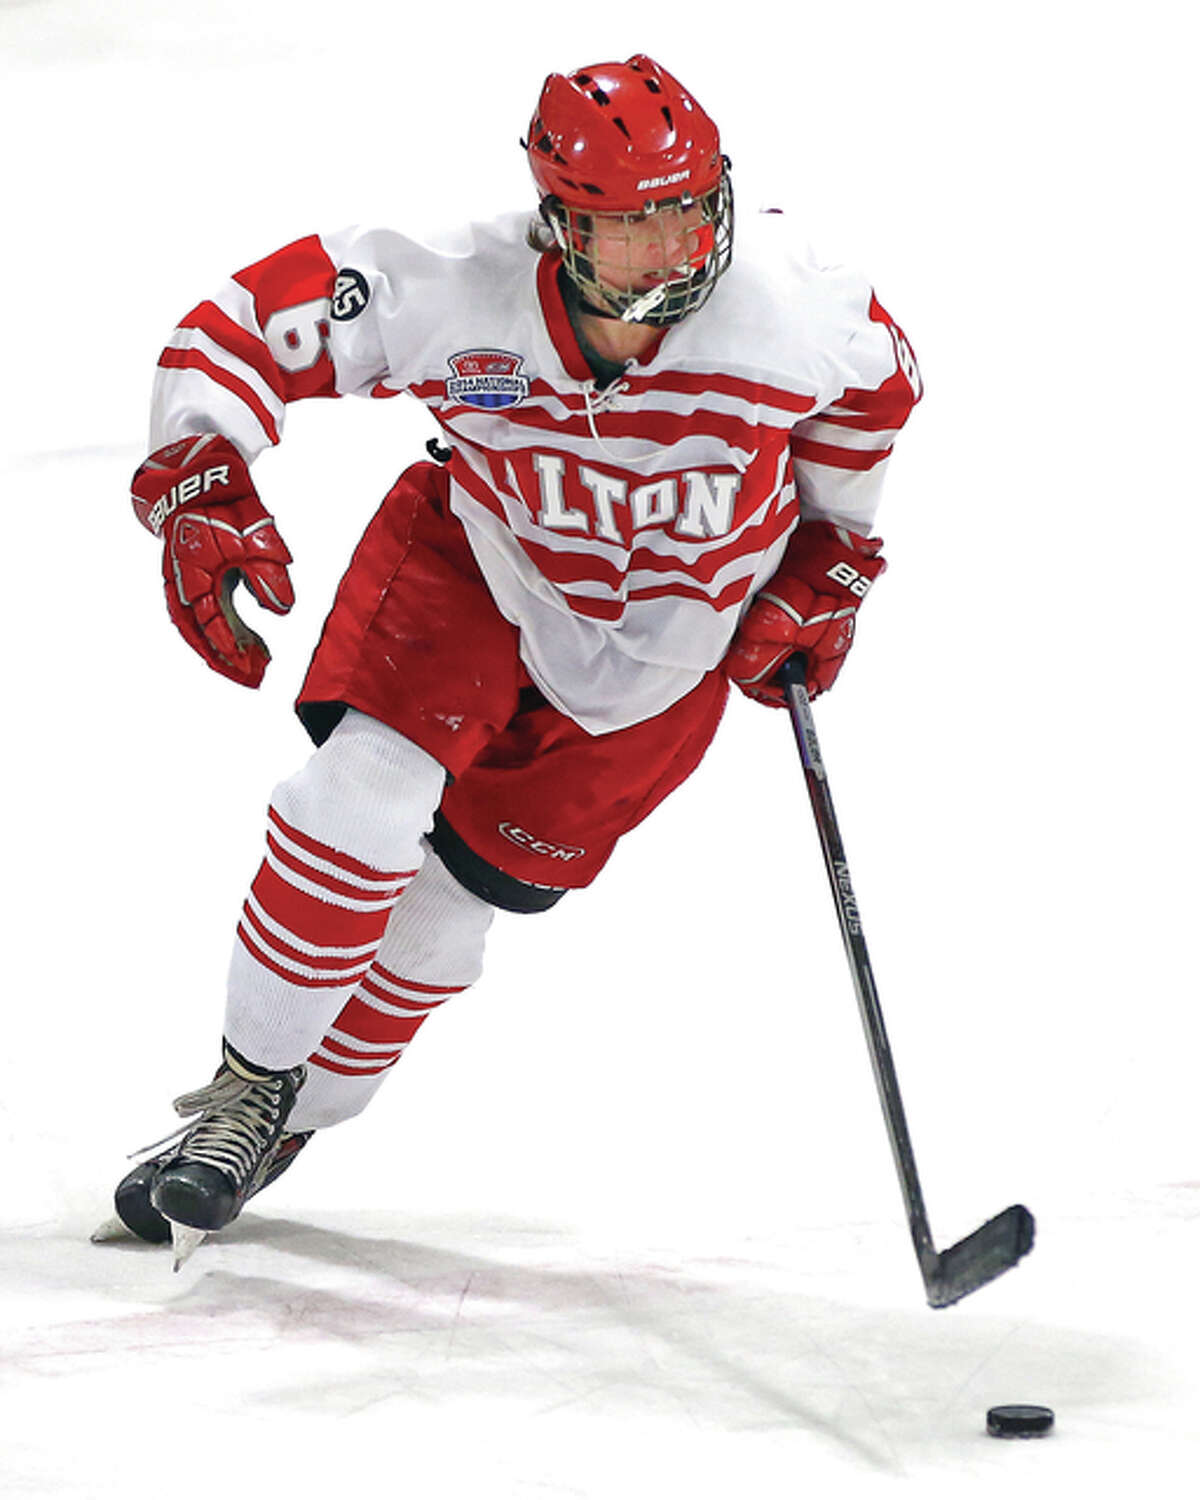 Jake Bohn had a goal and an assist in the Redbirds’ 5-2 victory over Bethalto Tuesday night at the East Alton Ice Arena.